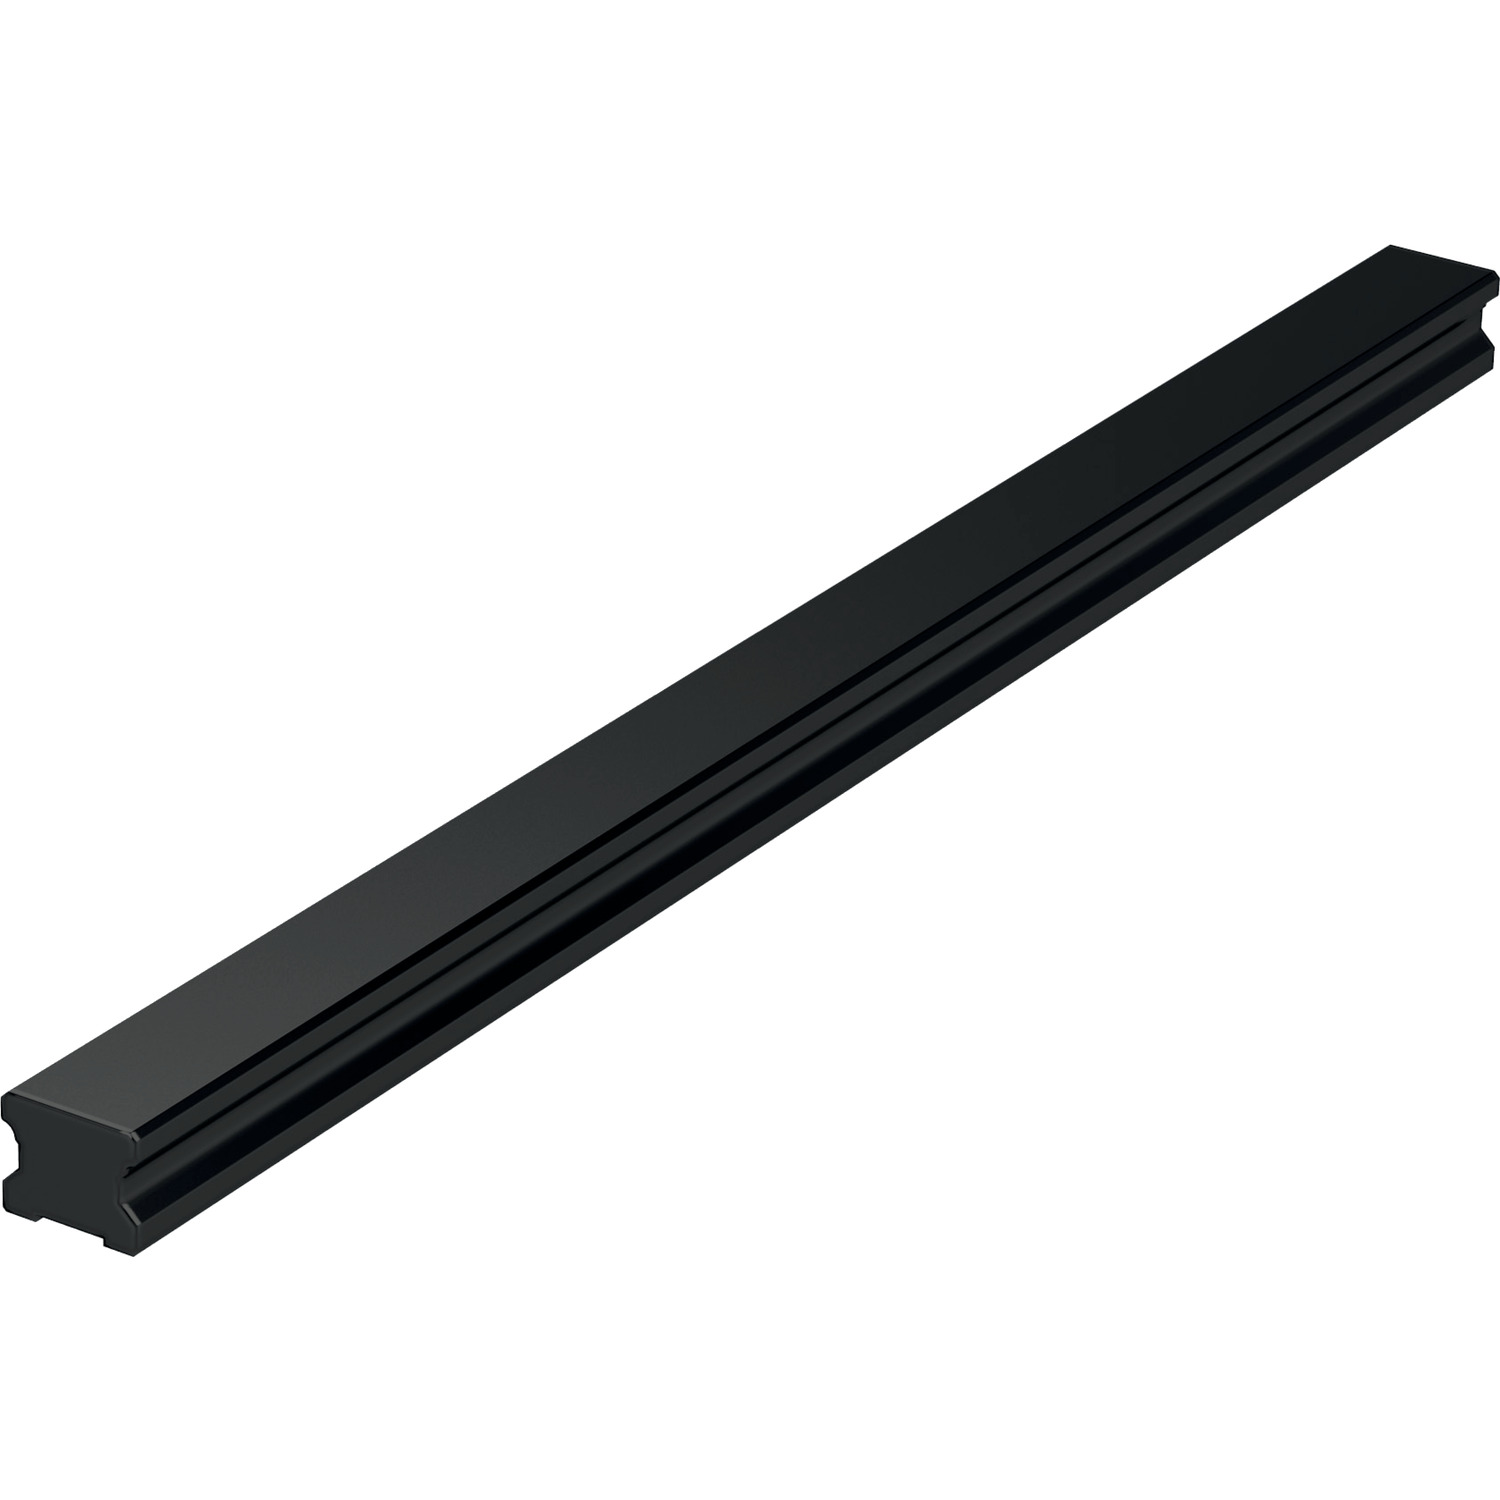 Product L1016.BR, 15mm Linear Guide Rail rear fixing, blackened / 